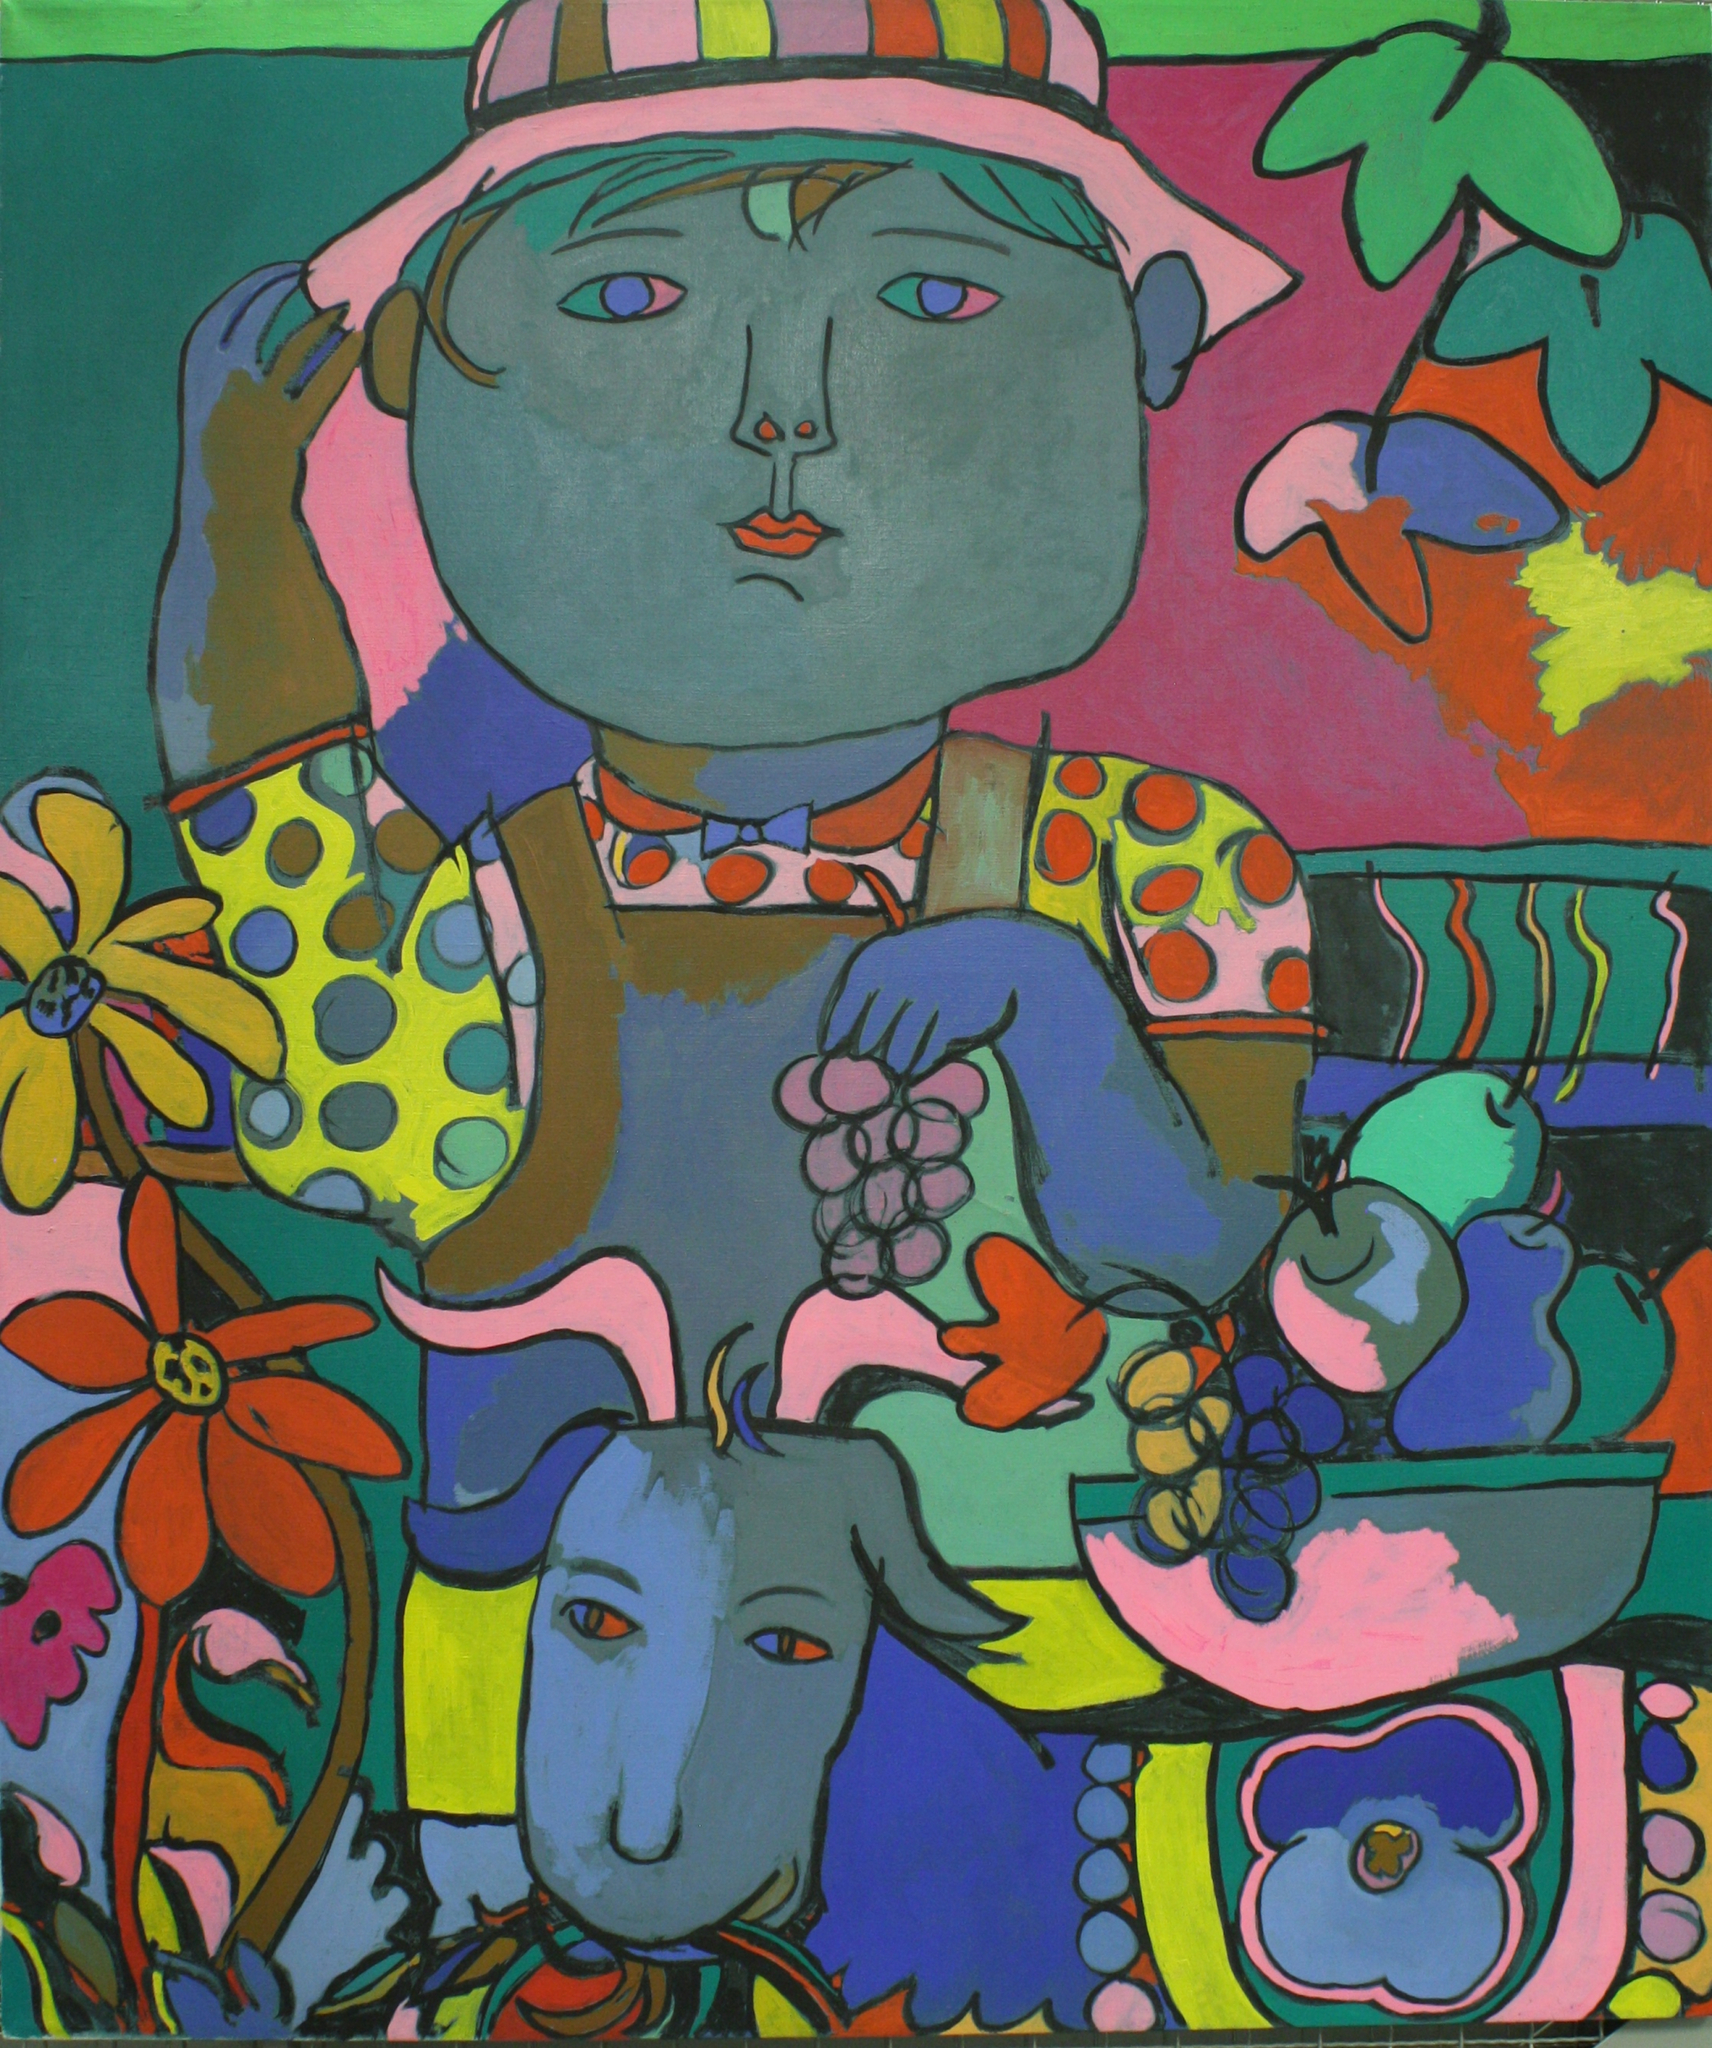 a colorful acrylic painting of a boy holding grapes and a bowl of fruit balanced on the back of a goat surrounded by flowers